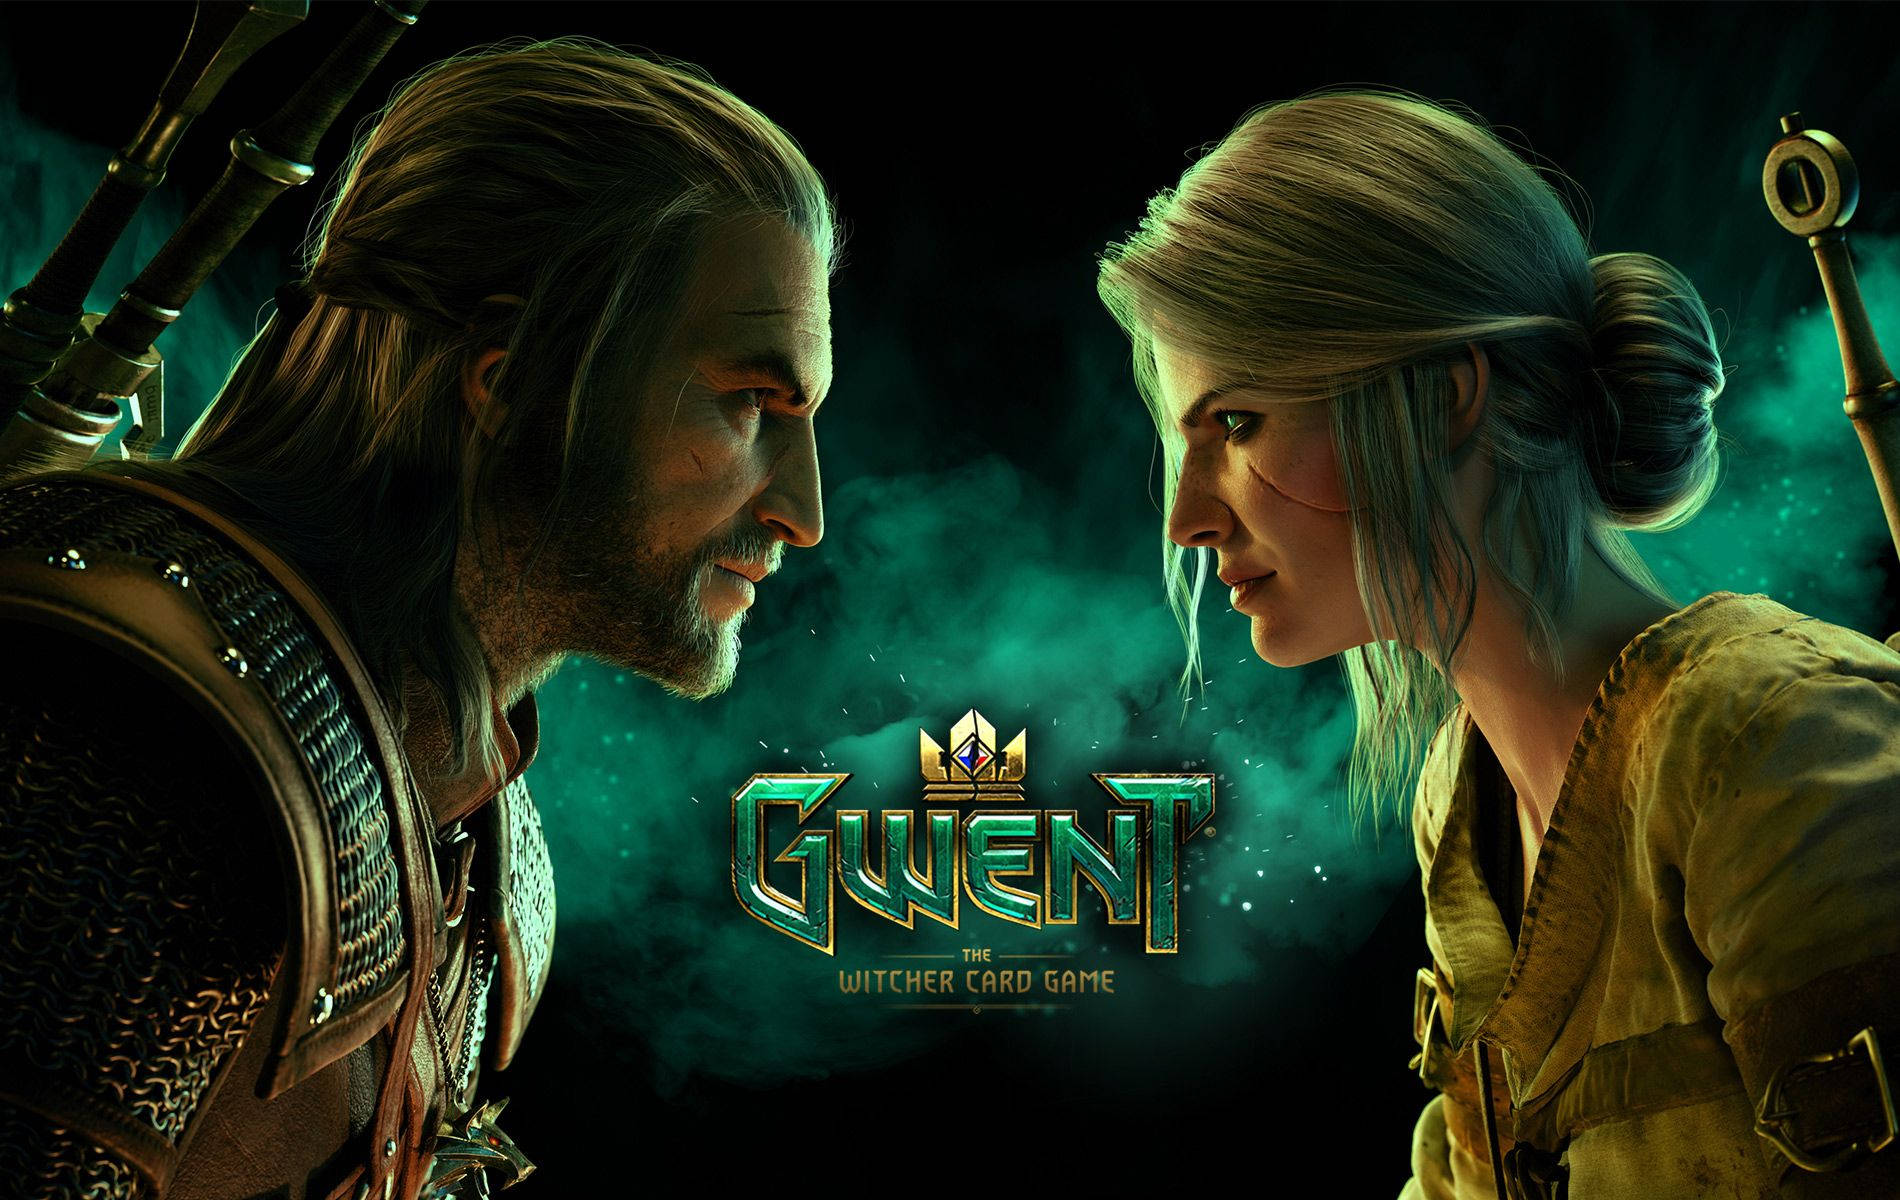 The Witcher Geralt And Ciri Poster